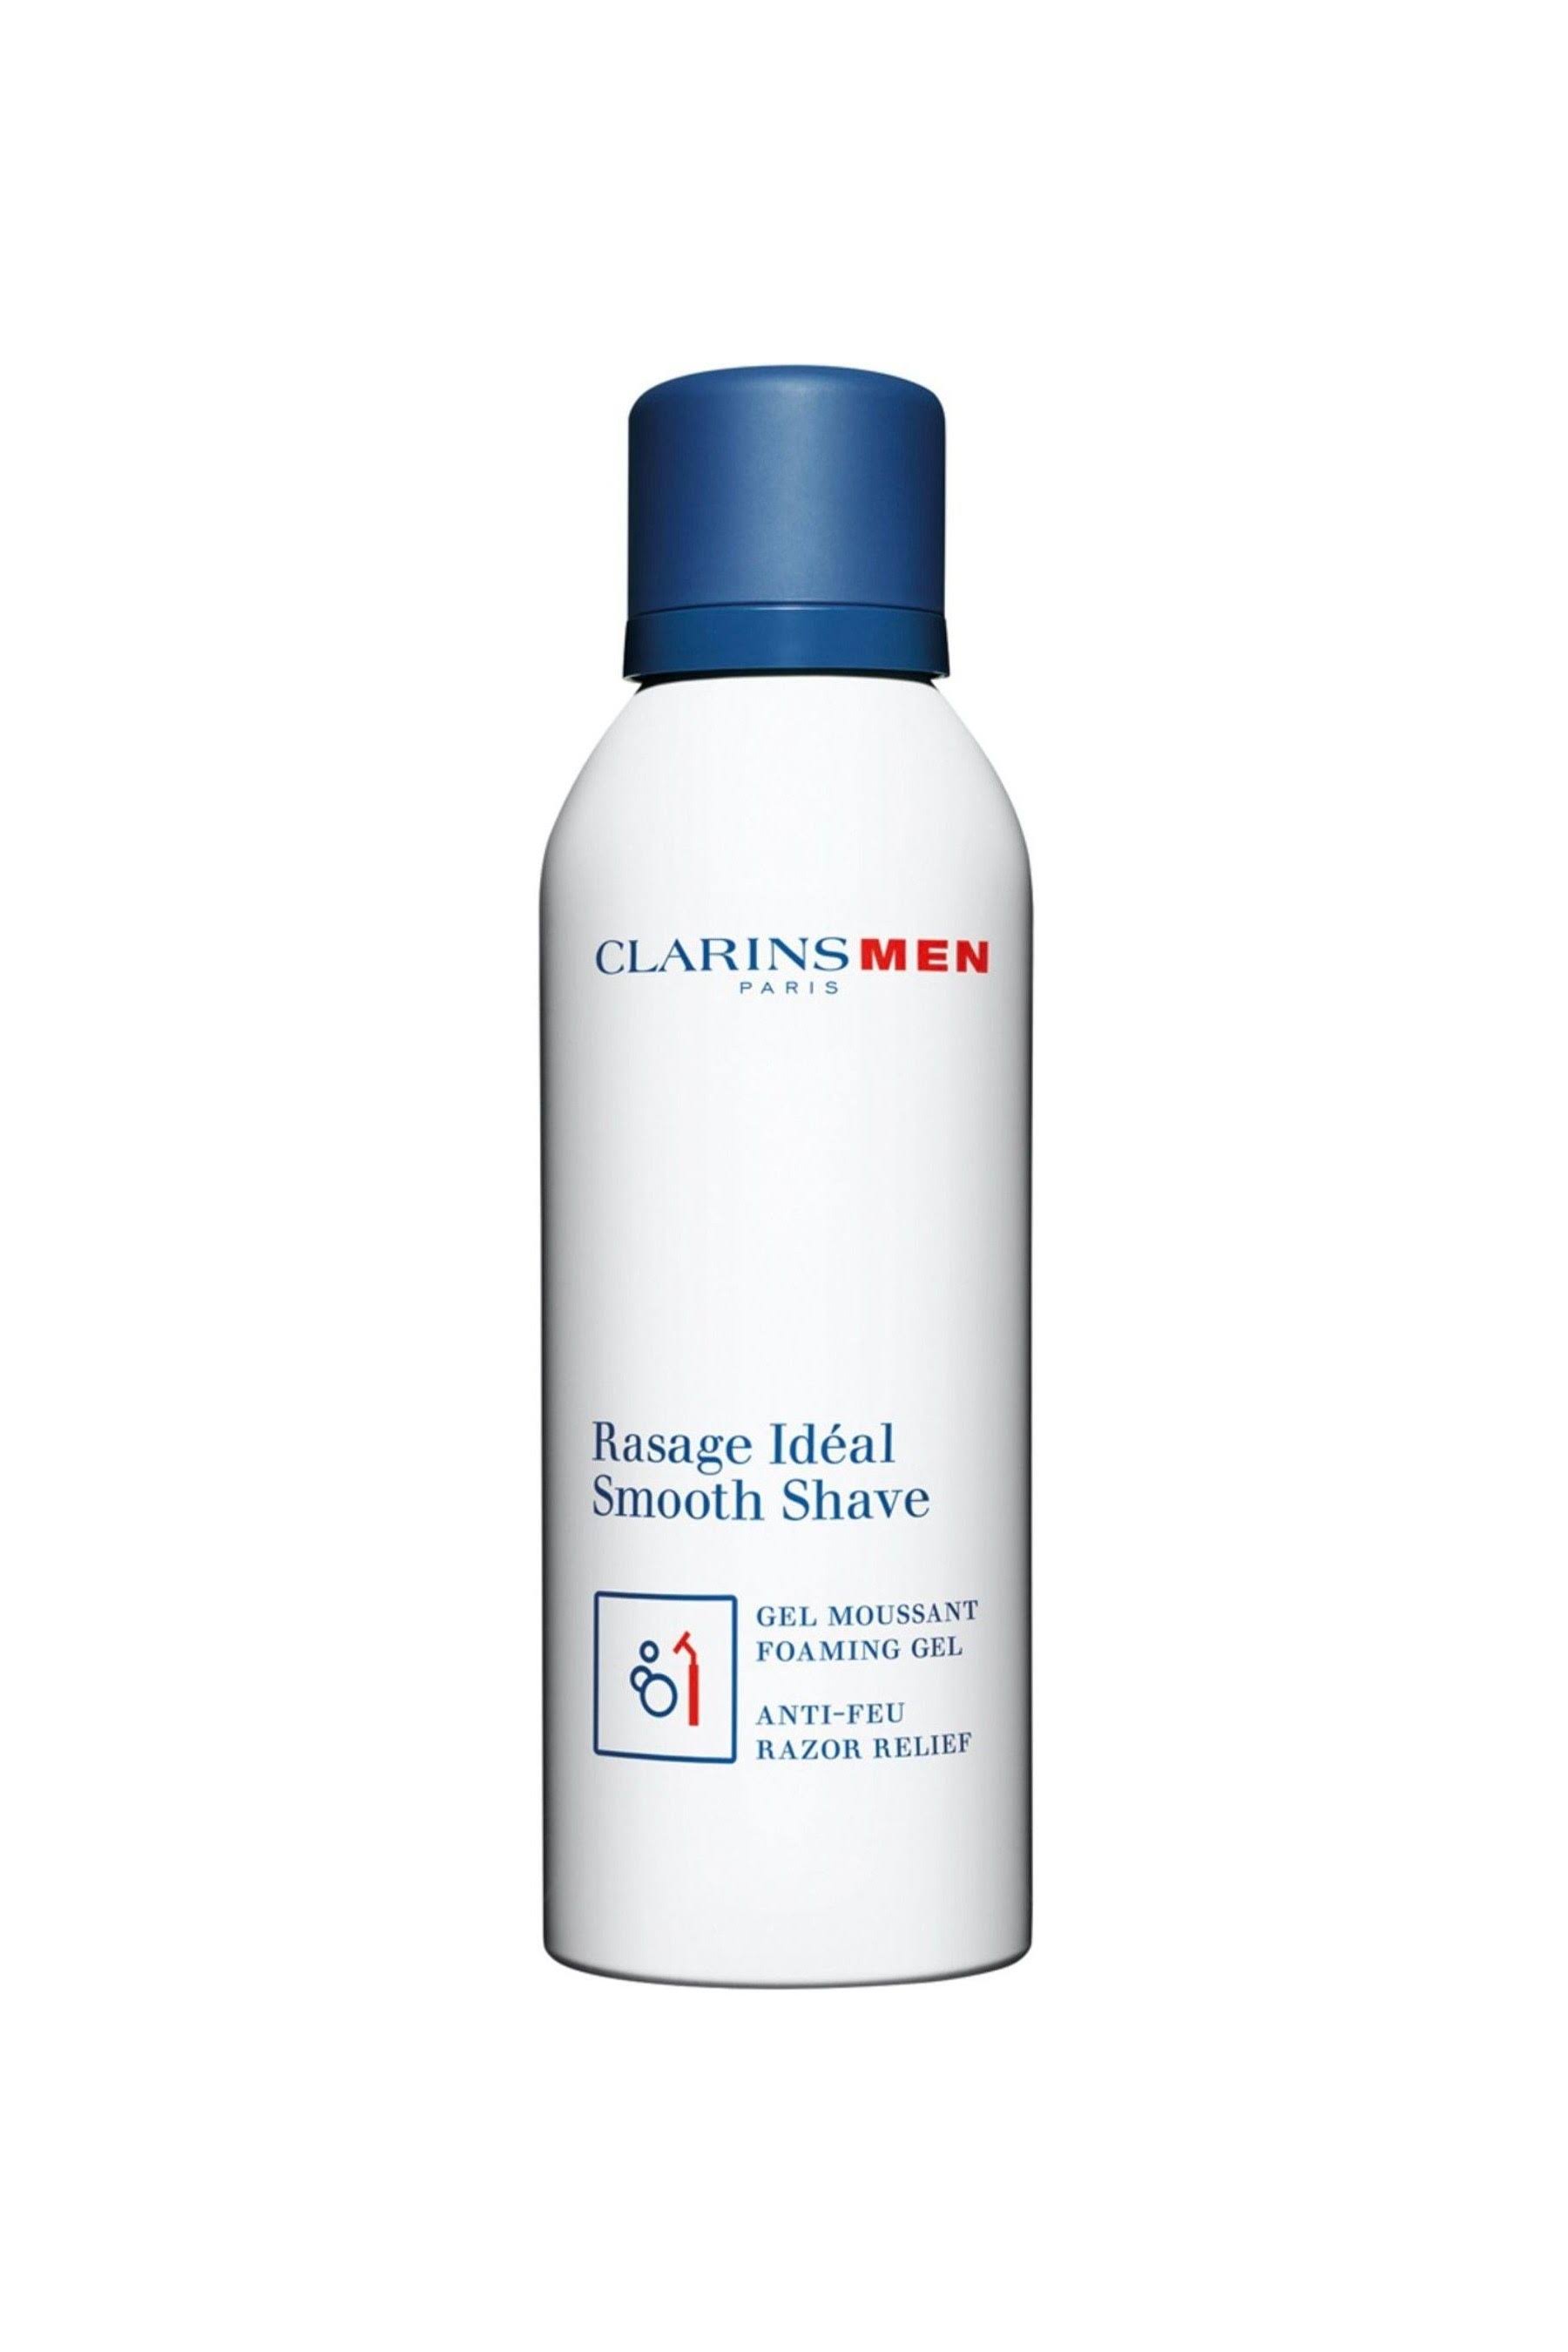 Clarins for Men Smooth Shave Foaming Gel - 150ml